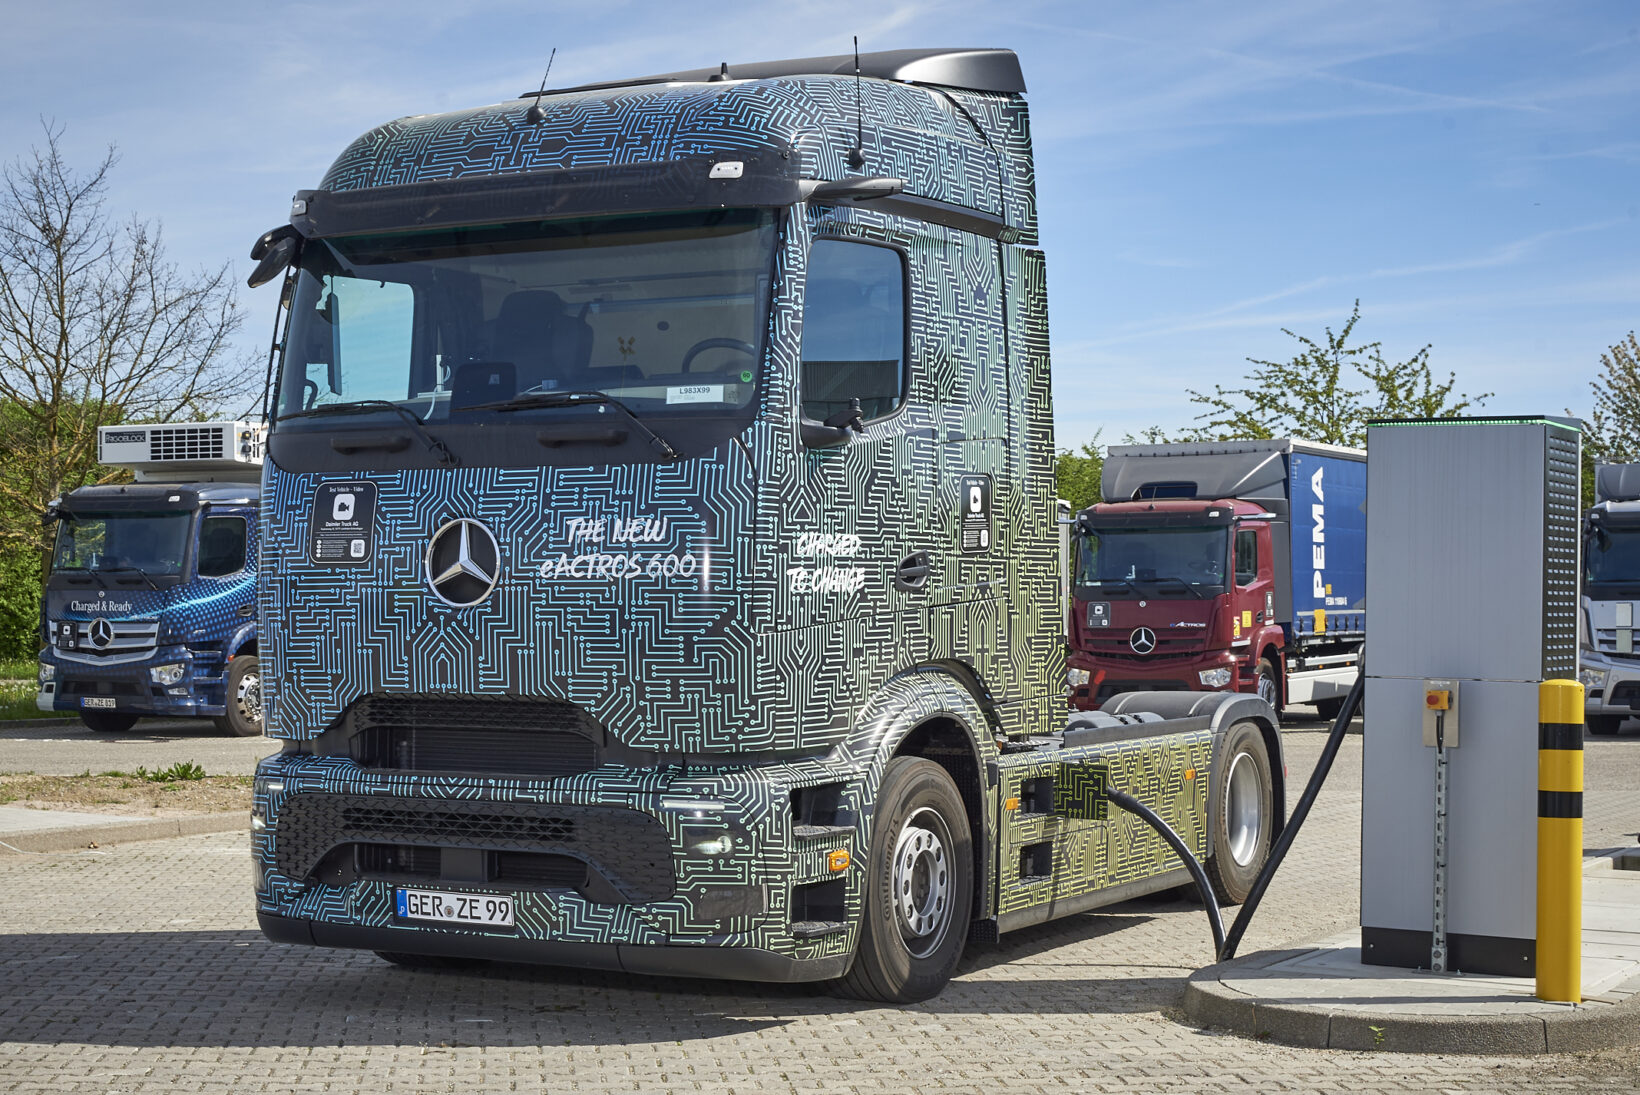 Mercedes demonstrates ultra-fast charging of its 1000 kW eActros 600 truck